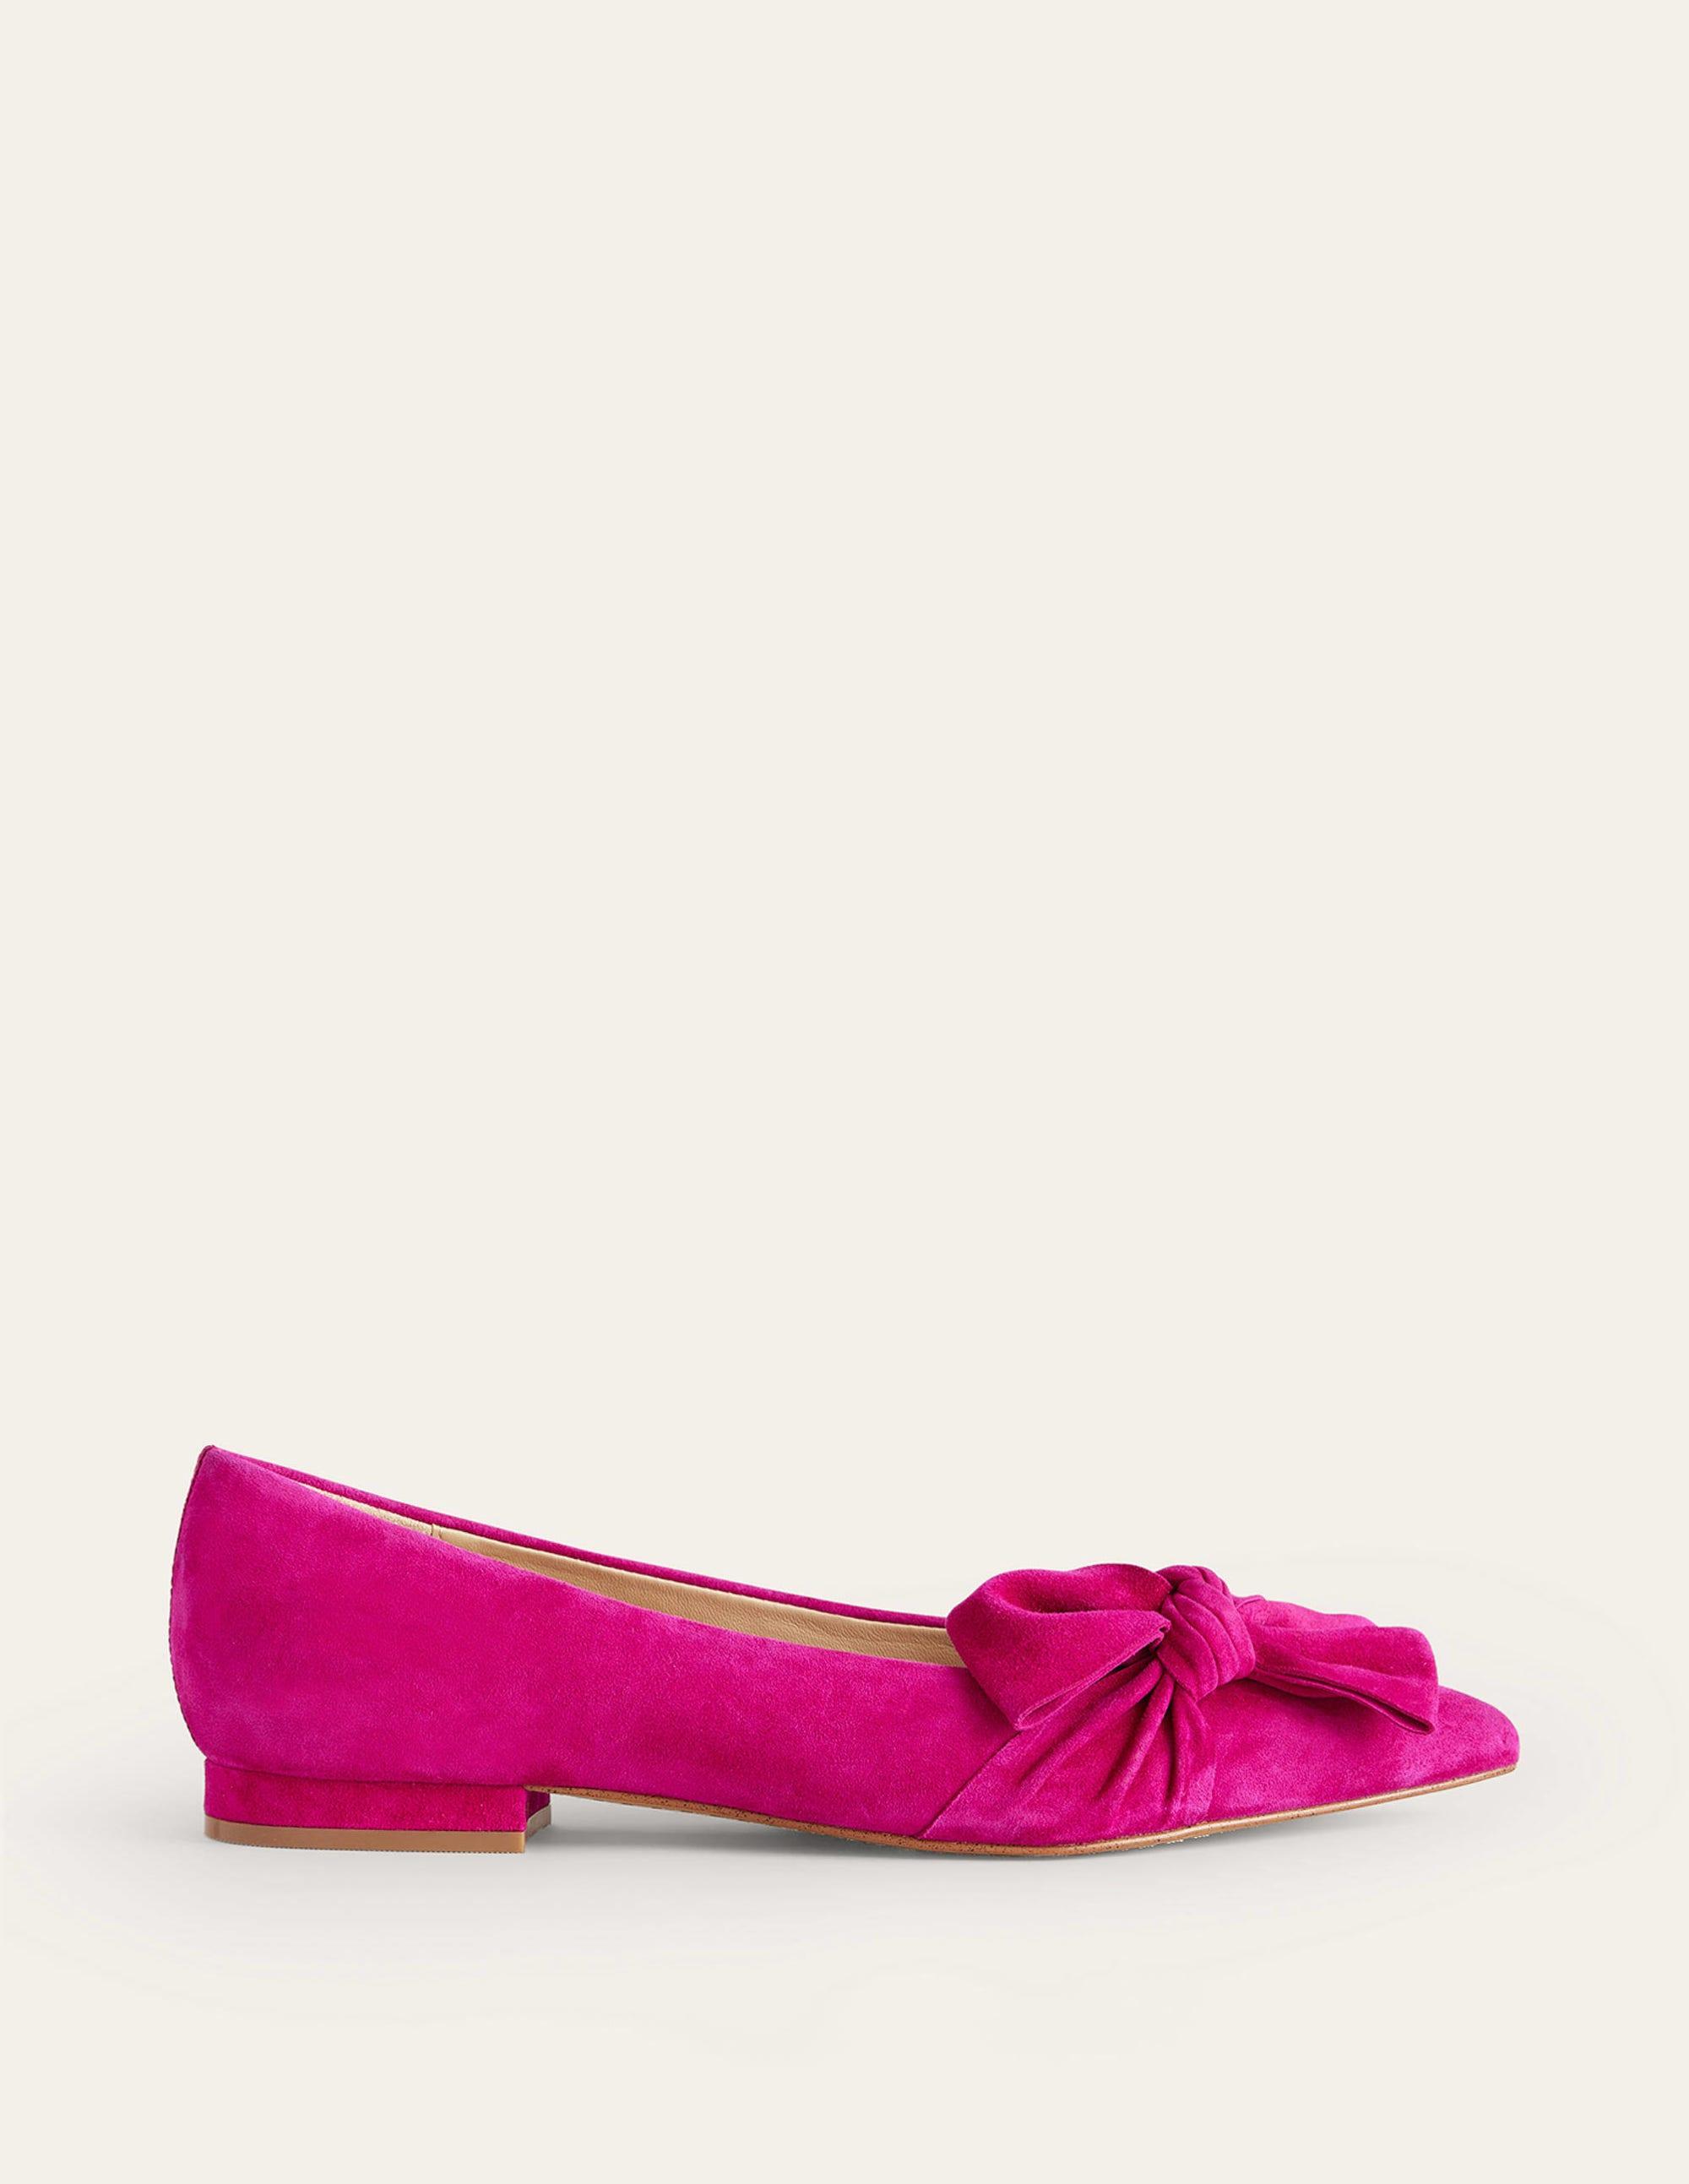 Boden Bow Ballet Flats in Pink | Lyst UK